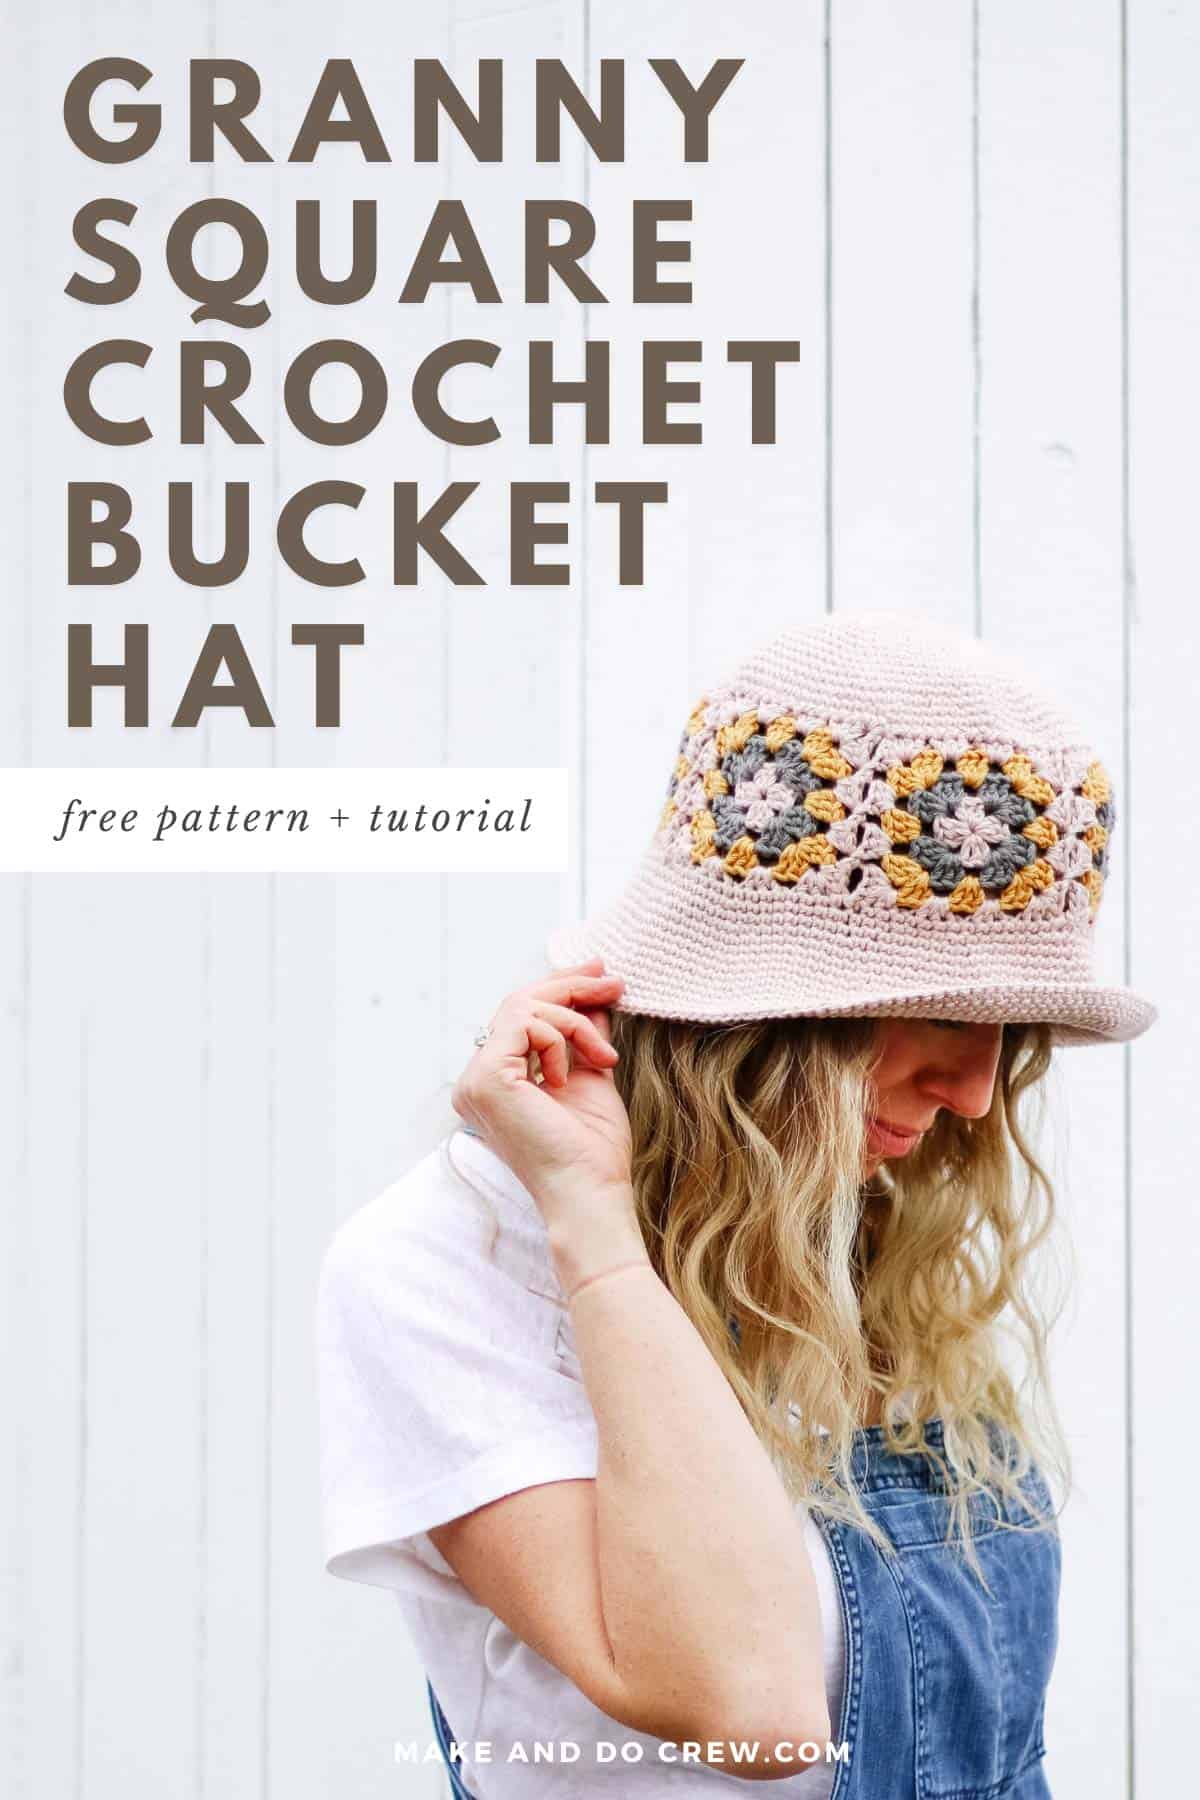 This image shows a woman with blonde hair wearing overalls and a white shirt. She is wearing a crochet bucket hat made out of granny squares. She has her right hand touching the brim of the hat and she is looking down at the ground.